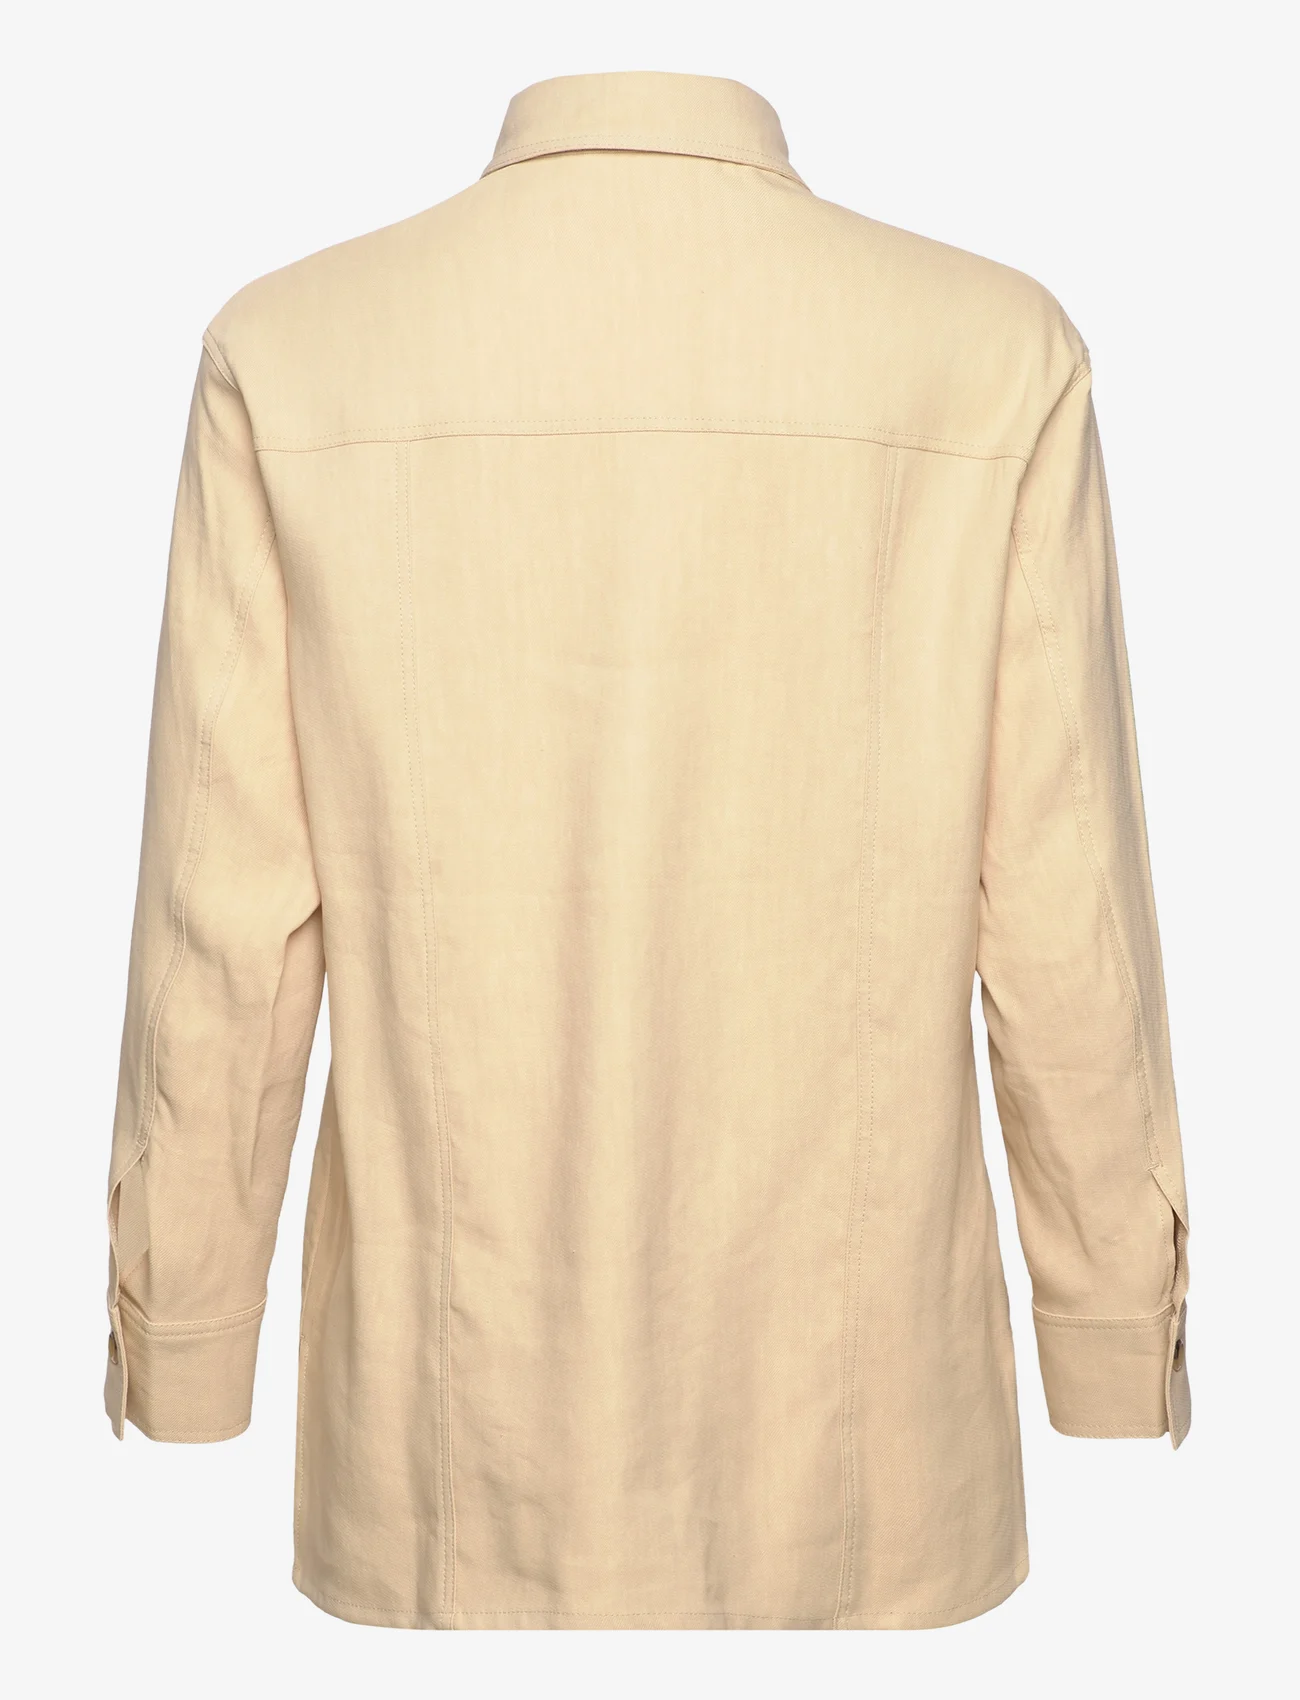 RODEBJER - RODEBJER ARIA - linen shirts - warm sand - 1